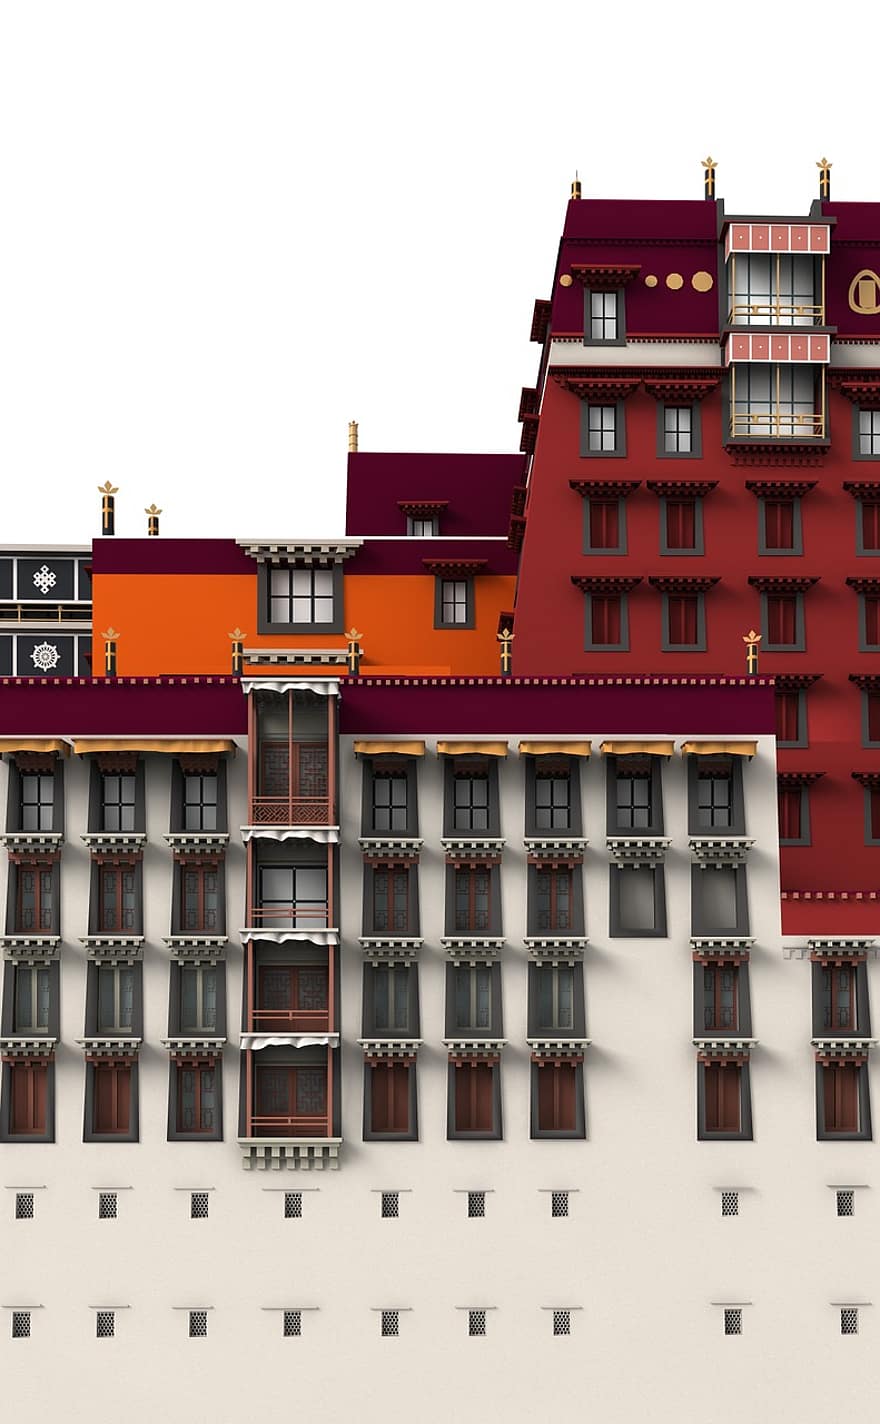 Potala, Palace, Lhasa, Architecture, Building, Church, Places Of Interest, Historically, Tourists, Attraction, Landmark